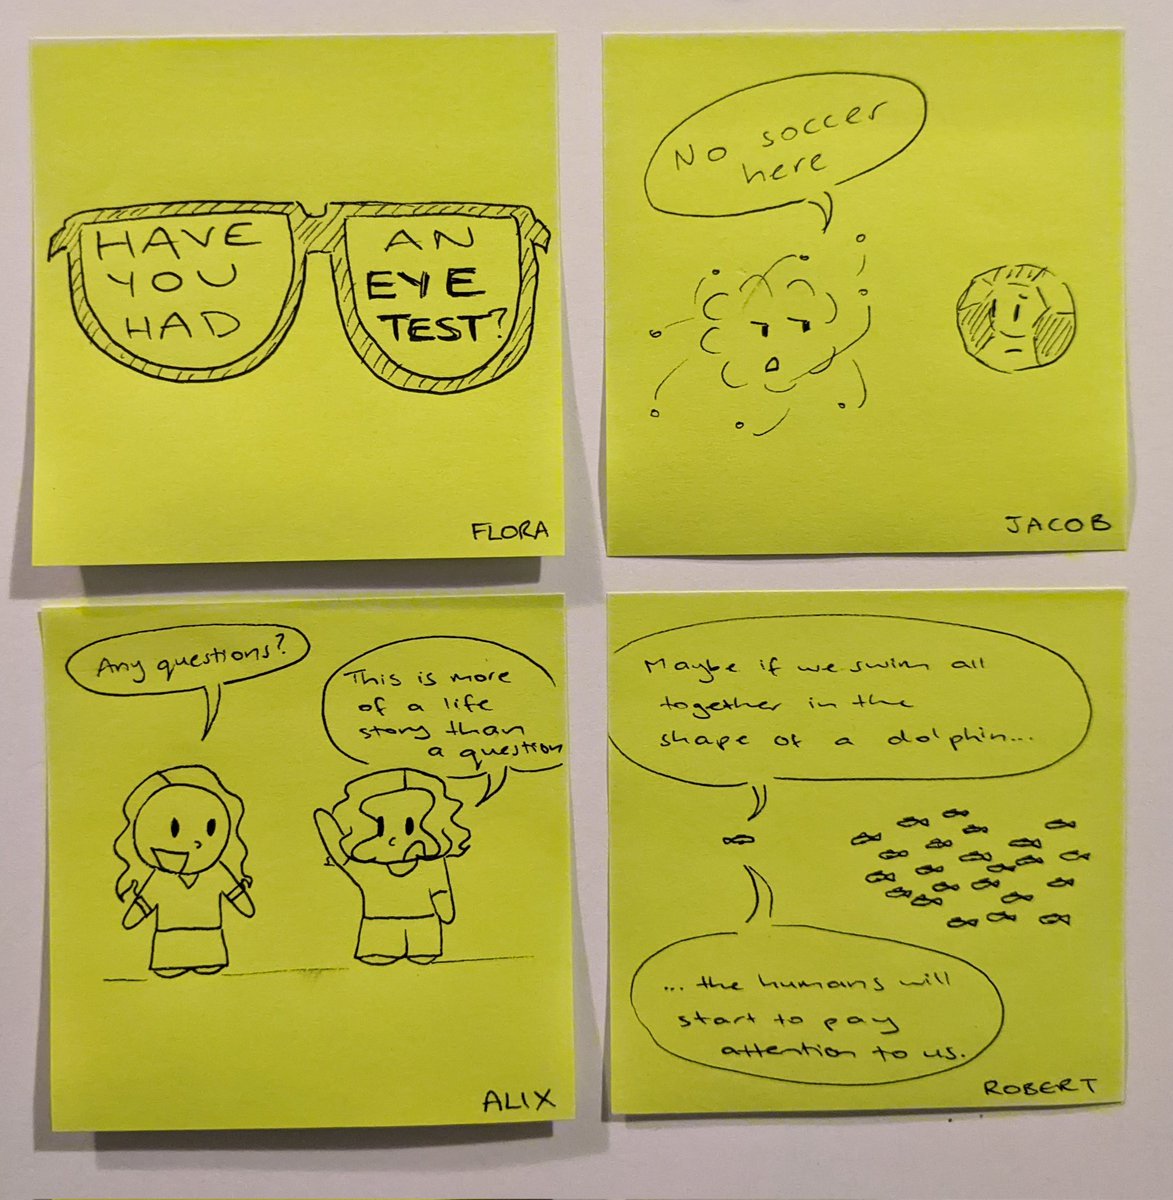 Started day 2 of #ABCTop5Science with Post-it cartoons for my fellow TOP 5 about their research @RadioNational Eyes for @FloraHui, soccer-free oxygen for @nzjakemartin, life stories for @AlixWoolard, underappreciated fish for @robert_p_streit #SciComm